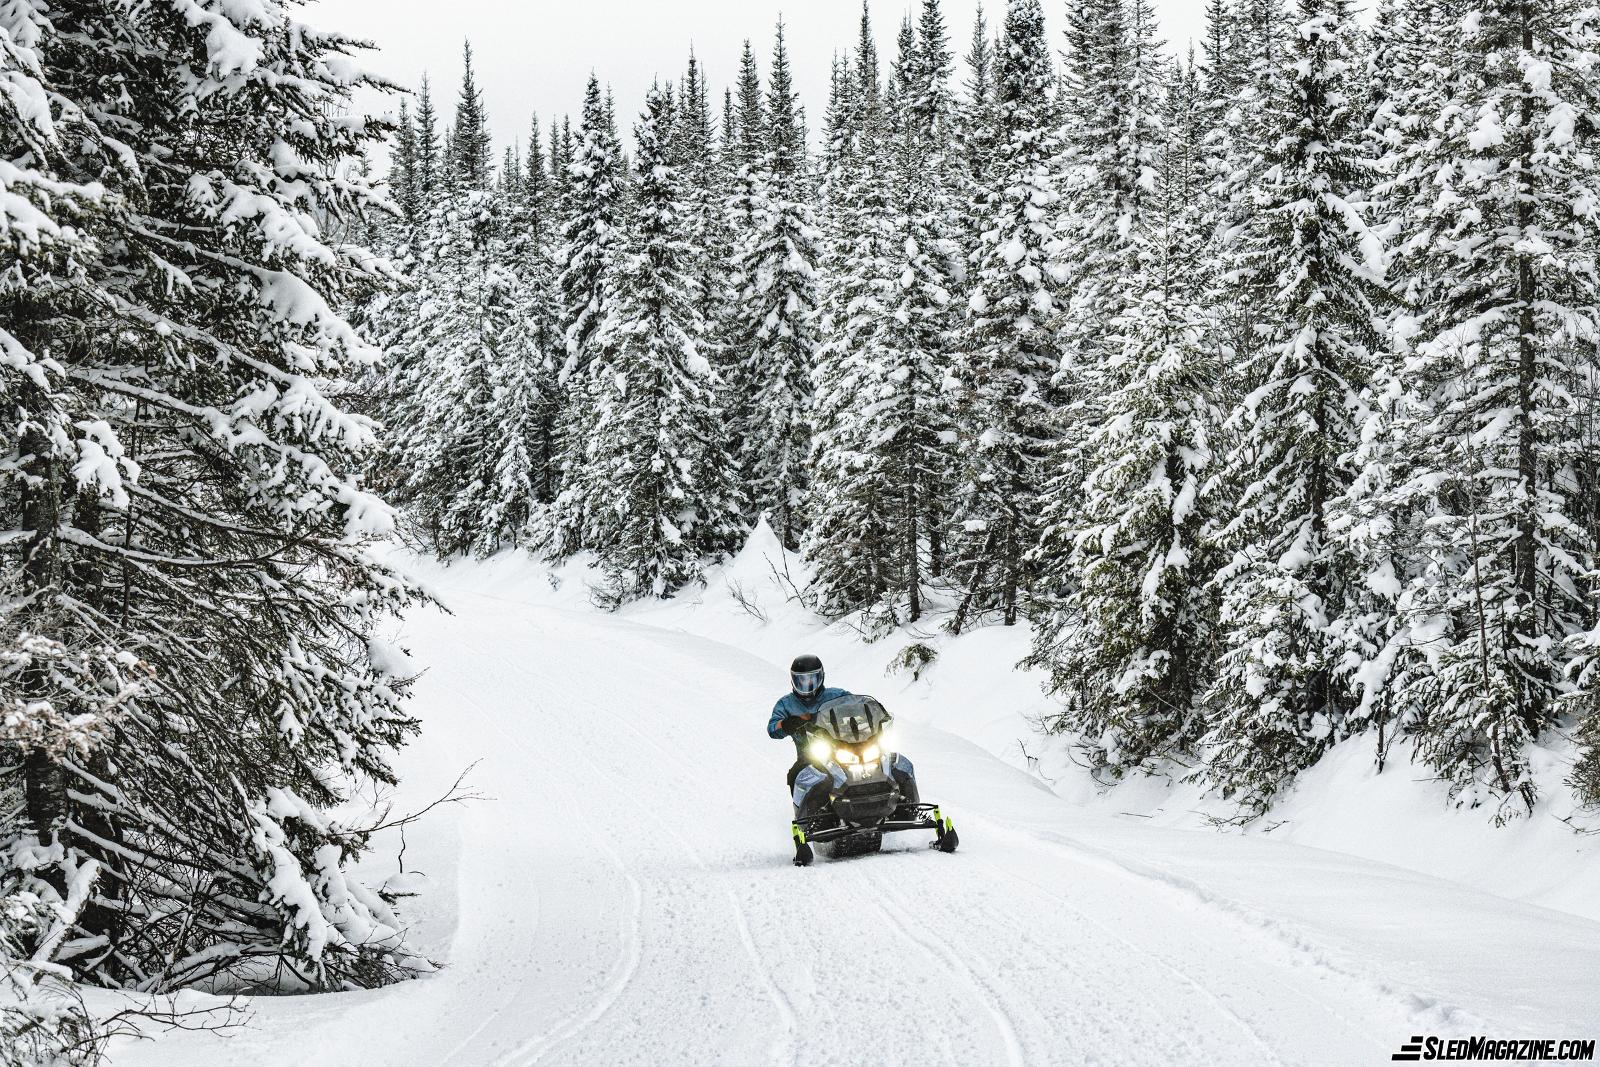 Power and Refinement for the 900 ACE Turbo Series - Ski-Doo - Snowmobile